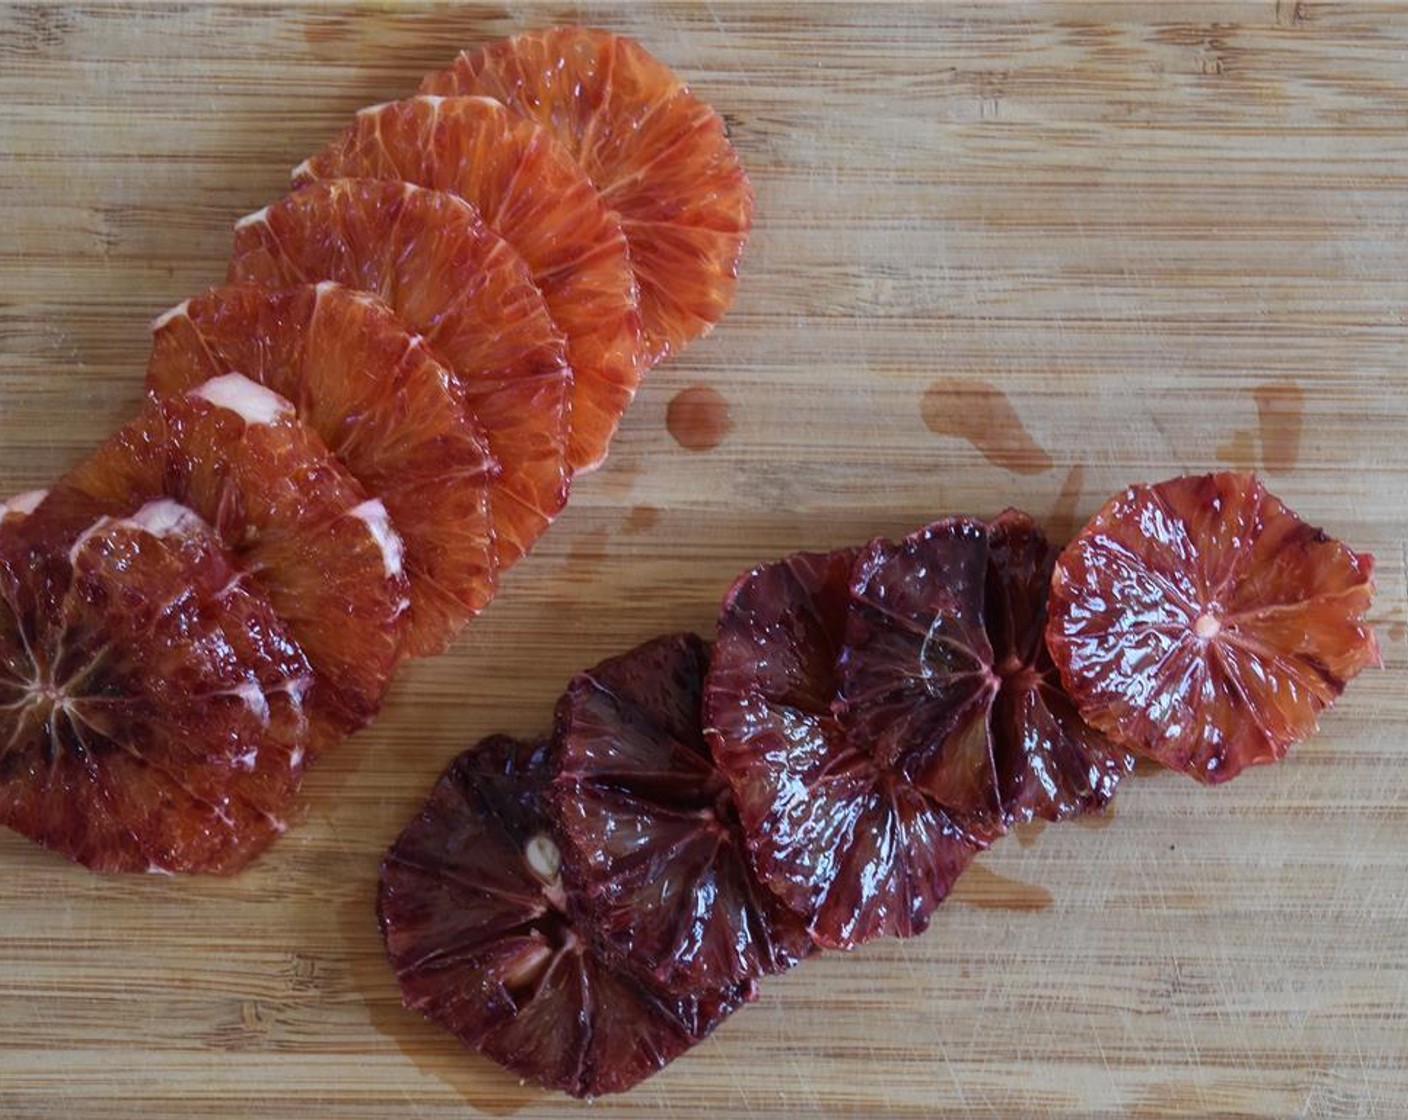 step 3 Slice the skin off the Blood Oranges (2), removing the white pith. Then slice the oranges into discs.